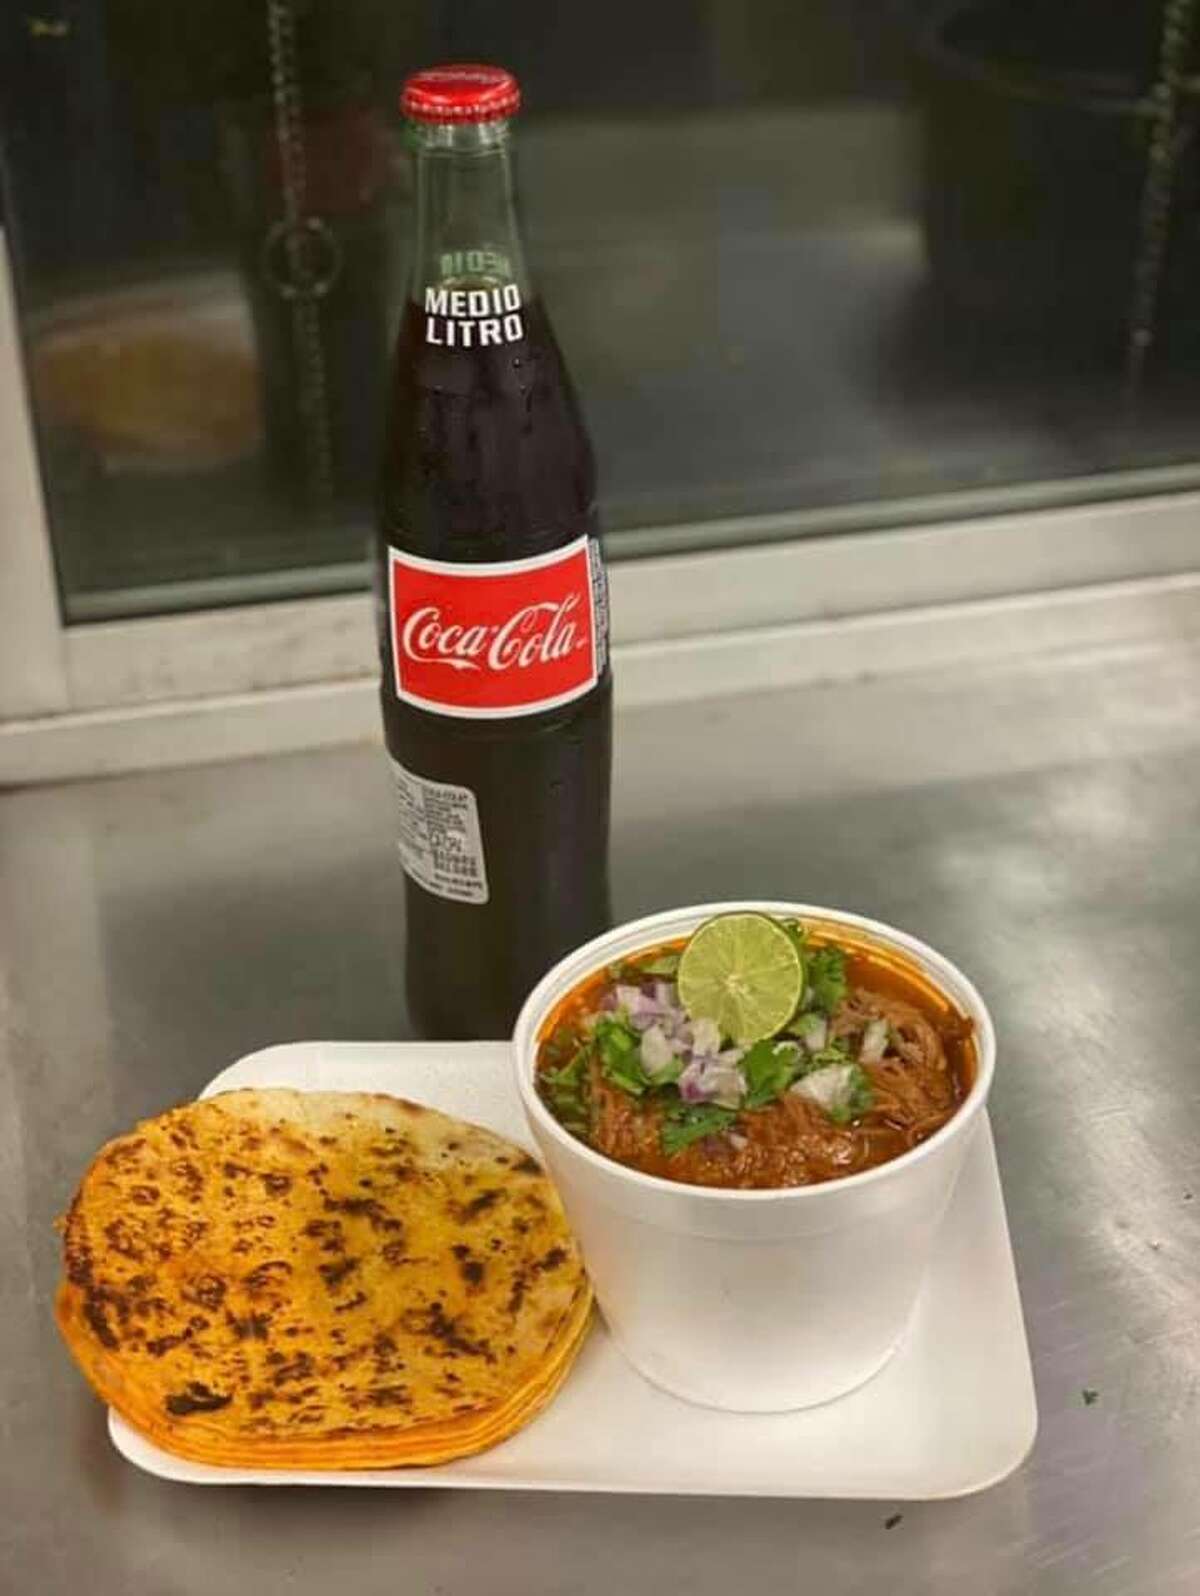 The couple, who've been together for 14 years, said they decided to launch their birria food truck because they love the Mexican dish and wanted to share it with the community. 